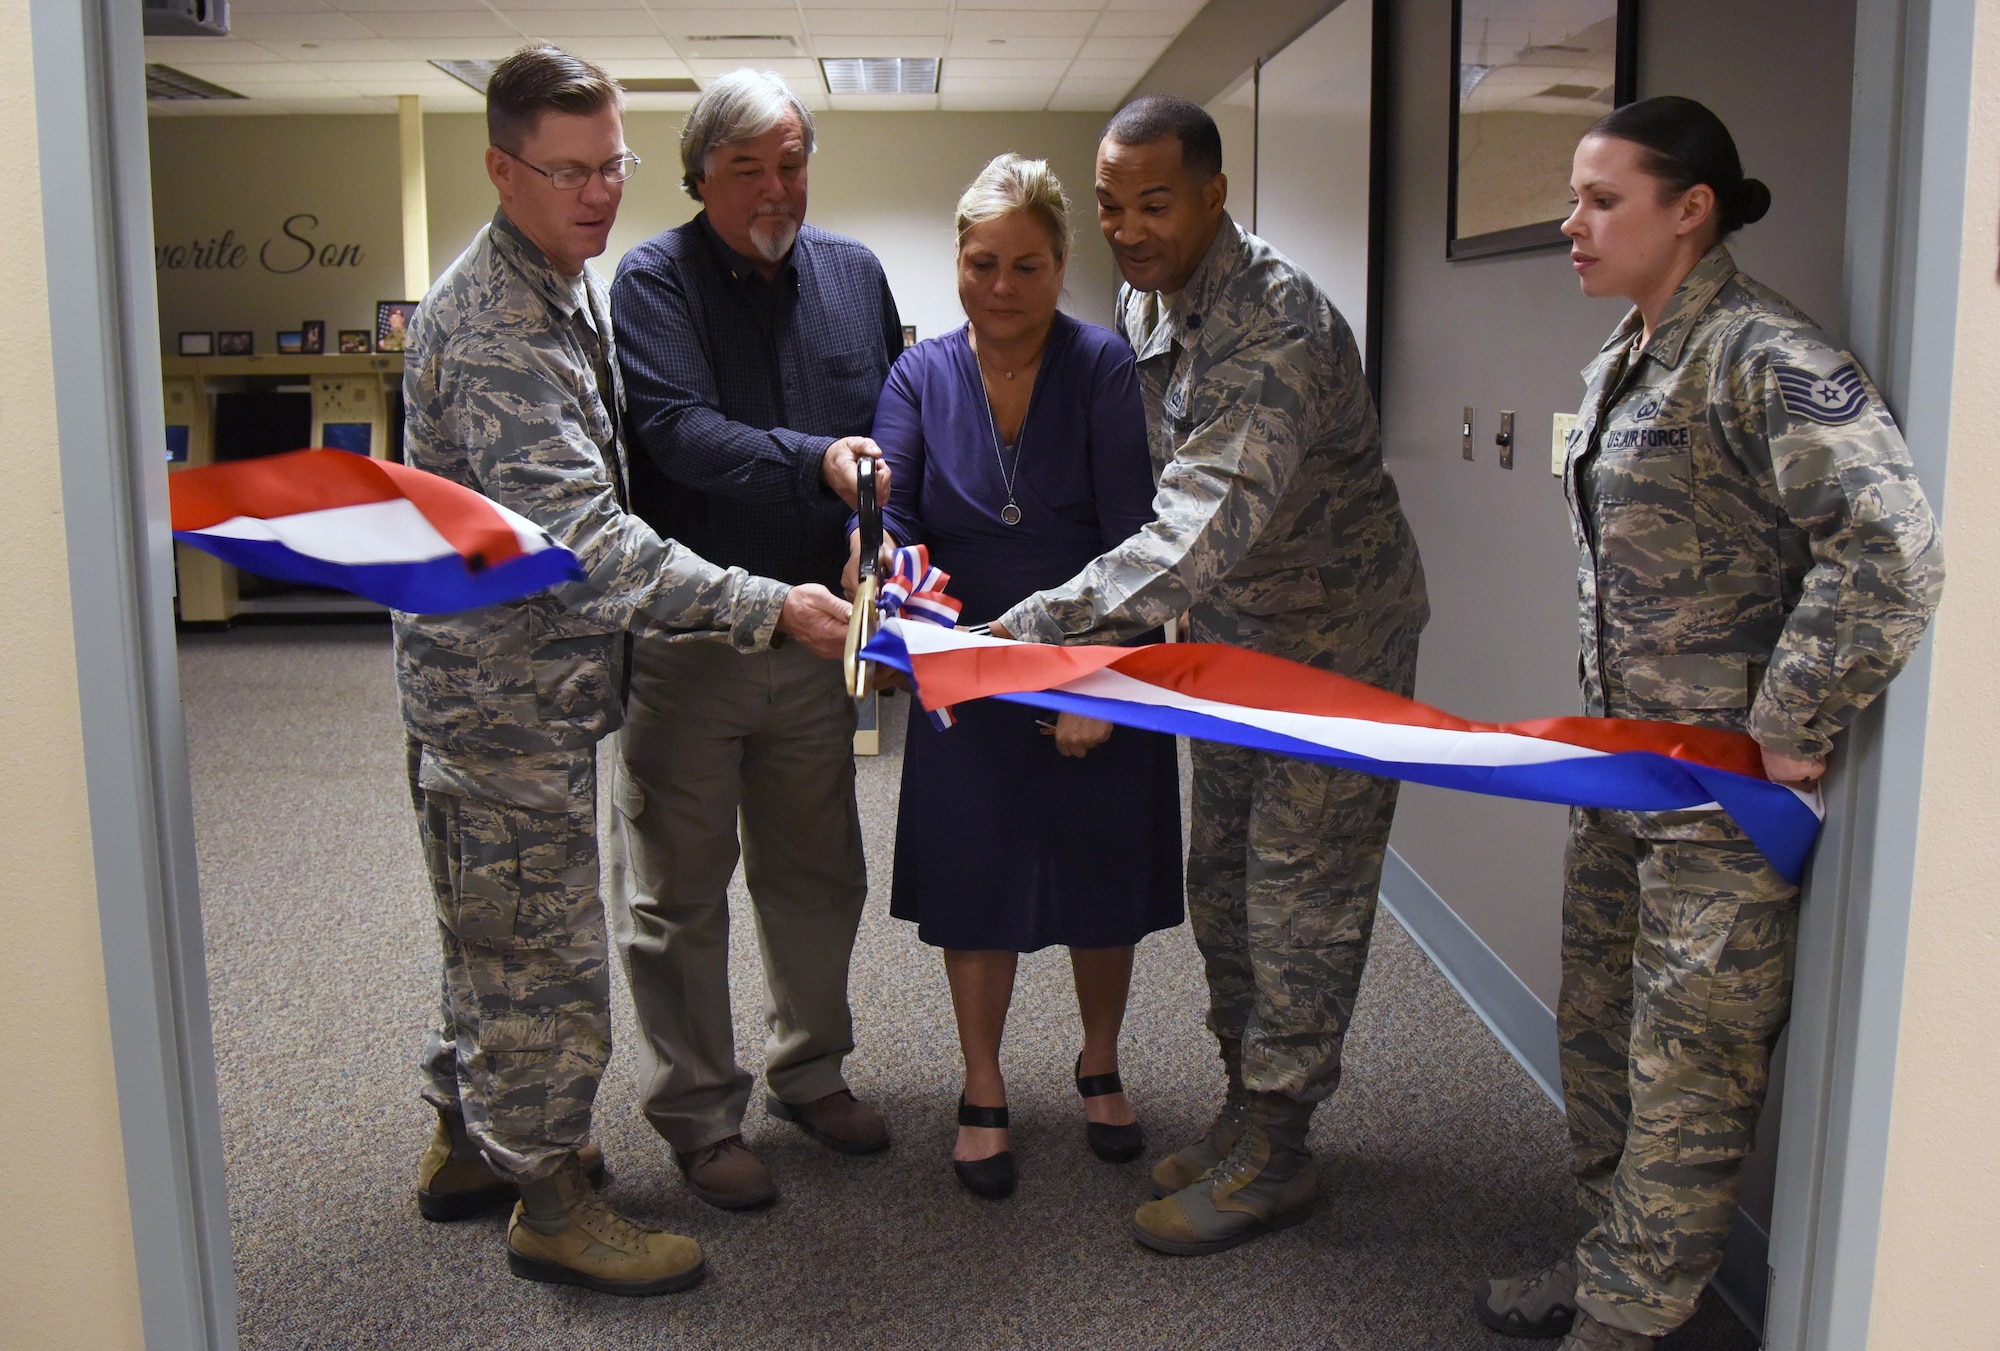 Col. C. Mike Smith, 81st Training Wing vice commander (left), and Lt. Col. Billy Wilson (right), 334th Training Squadron commander, assist Suzi Fernandez and Brent Sibley with cutting a ribbon to a training room during a dedication ceremony to honor their son, Staff Sgt. Forrest Sibley, at Cody Hall Oct. 20, 2017, on Keesler Air Force Base, Mississippi. Sibley was killed in combat in Afghanistan on Aug. 26, 2015. Sibley, a four-time Bronze Star medal recipient, was a combat controller who received his initial technical training from the 334th Training Squadron here. (U.S. Air Force photo by Kemberly Groue)